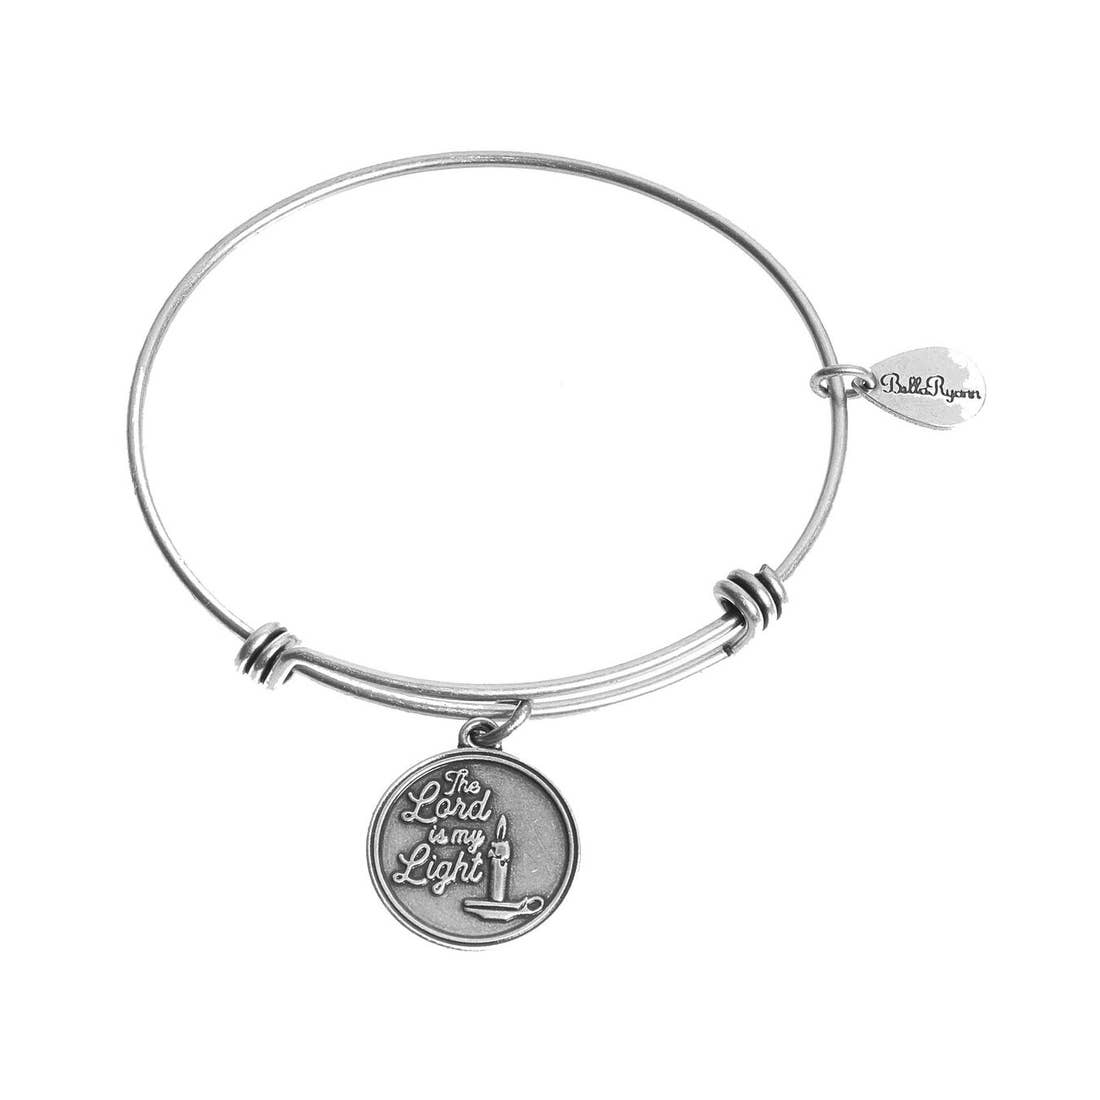 The Lord is My Light Expandable Bangle Charm Bracelet in Silver